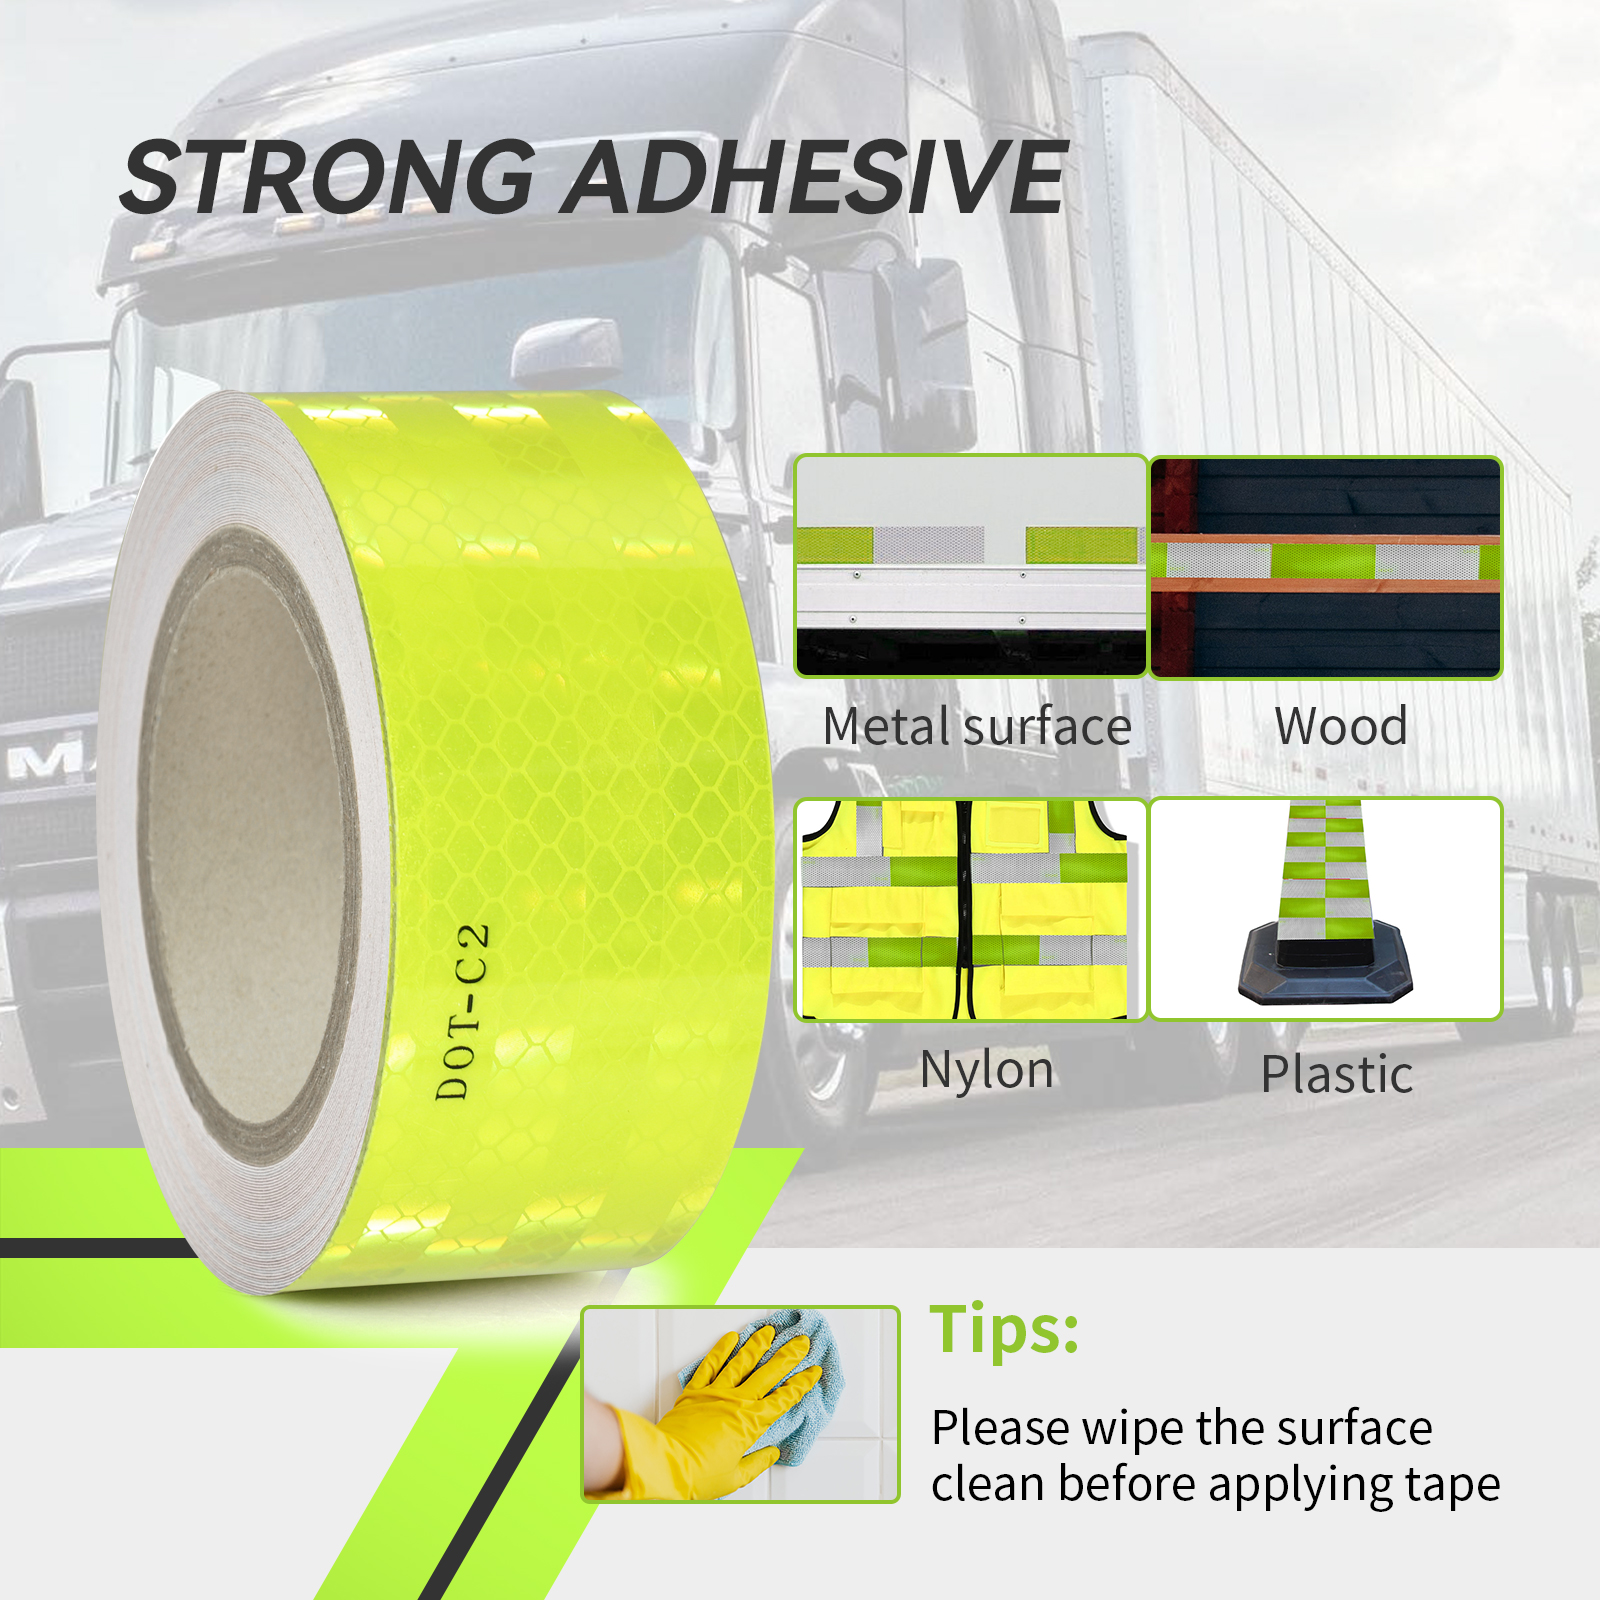  2 Inch x 25 Feet DOT Trailer Reflective Tape, Waterproof Highly Visible, Fluorescent Yellow Green, Reflective Tape